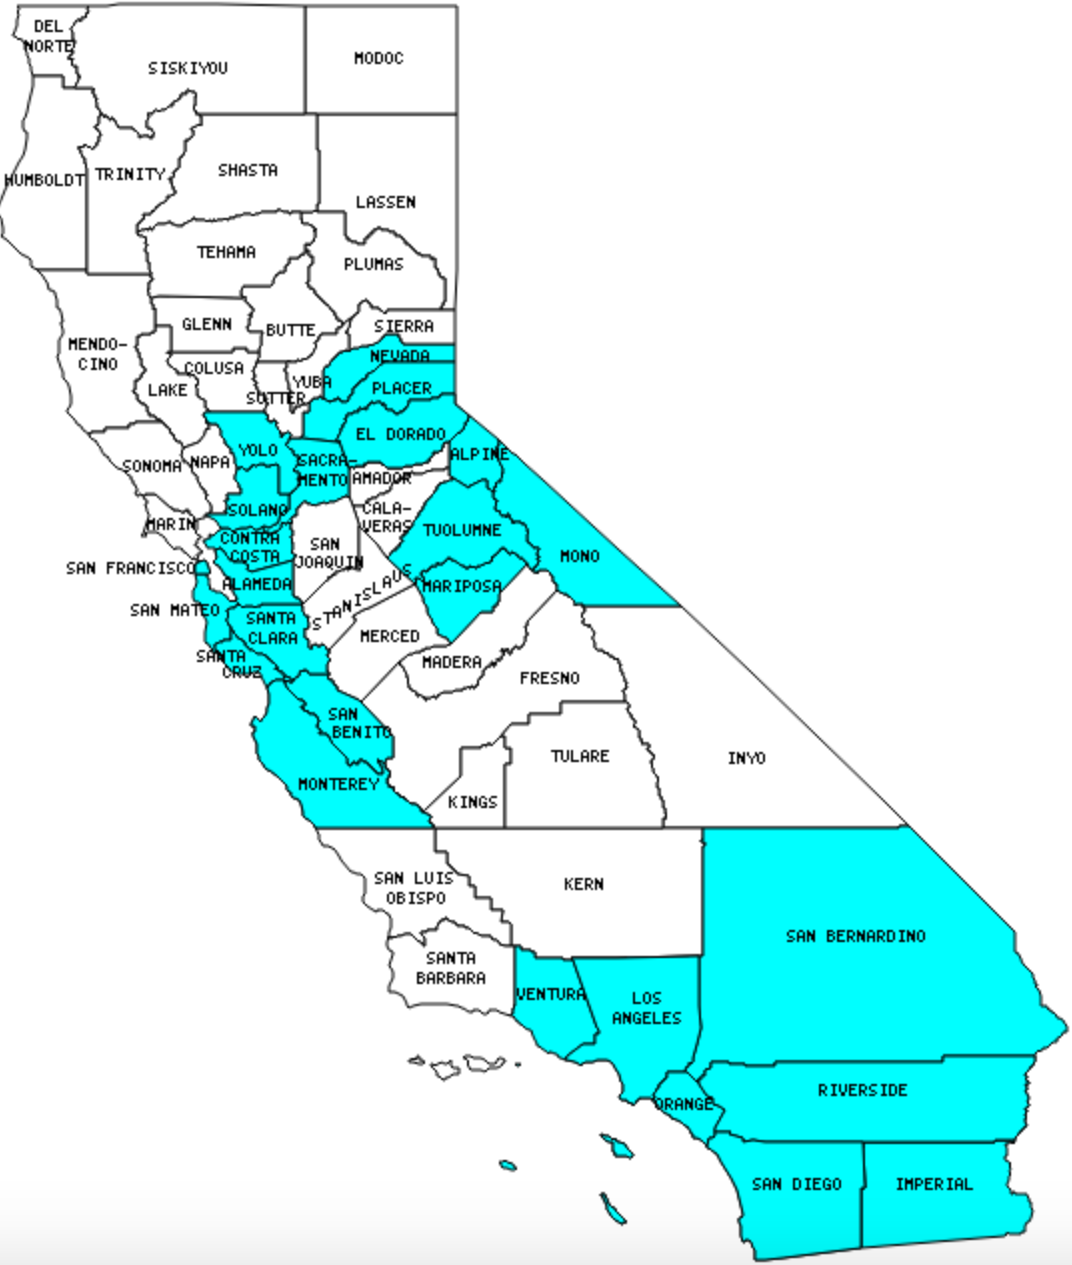 California Counties Visited